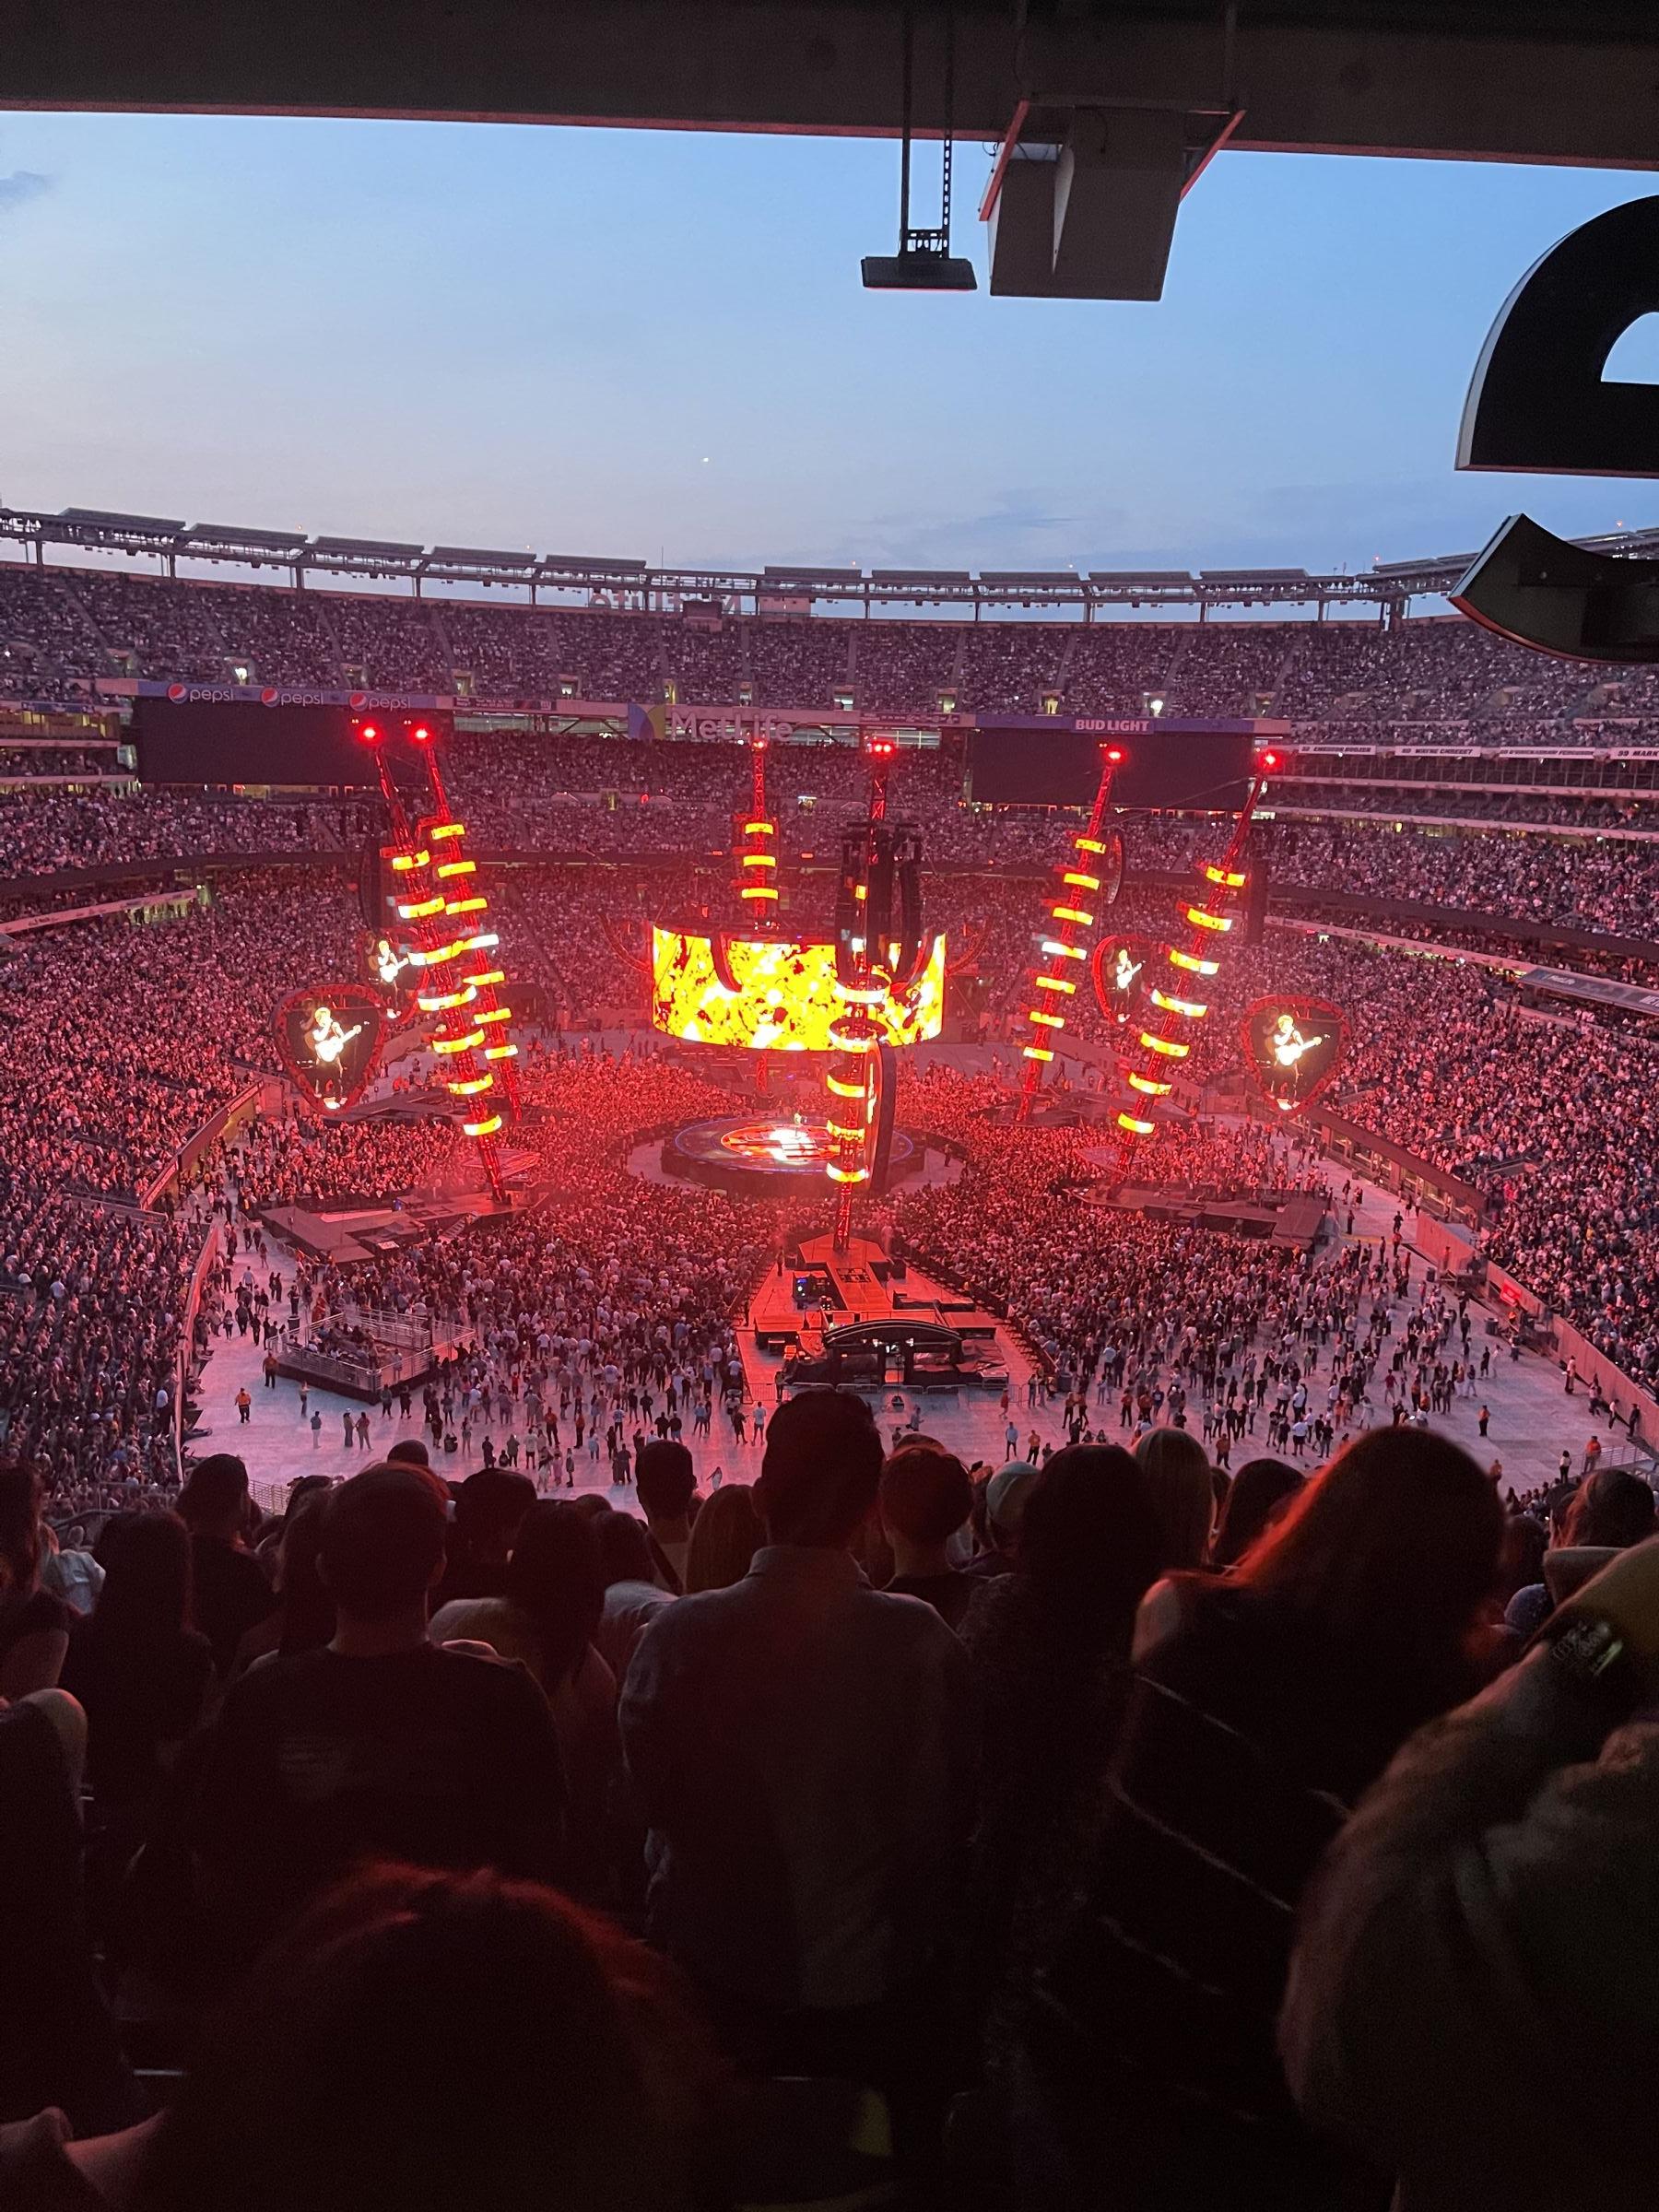 section 227b, row 15 seat view  for concert - metlife stadium